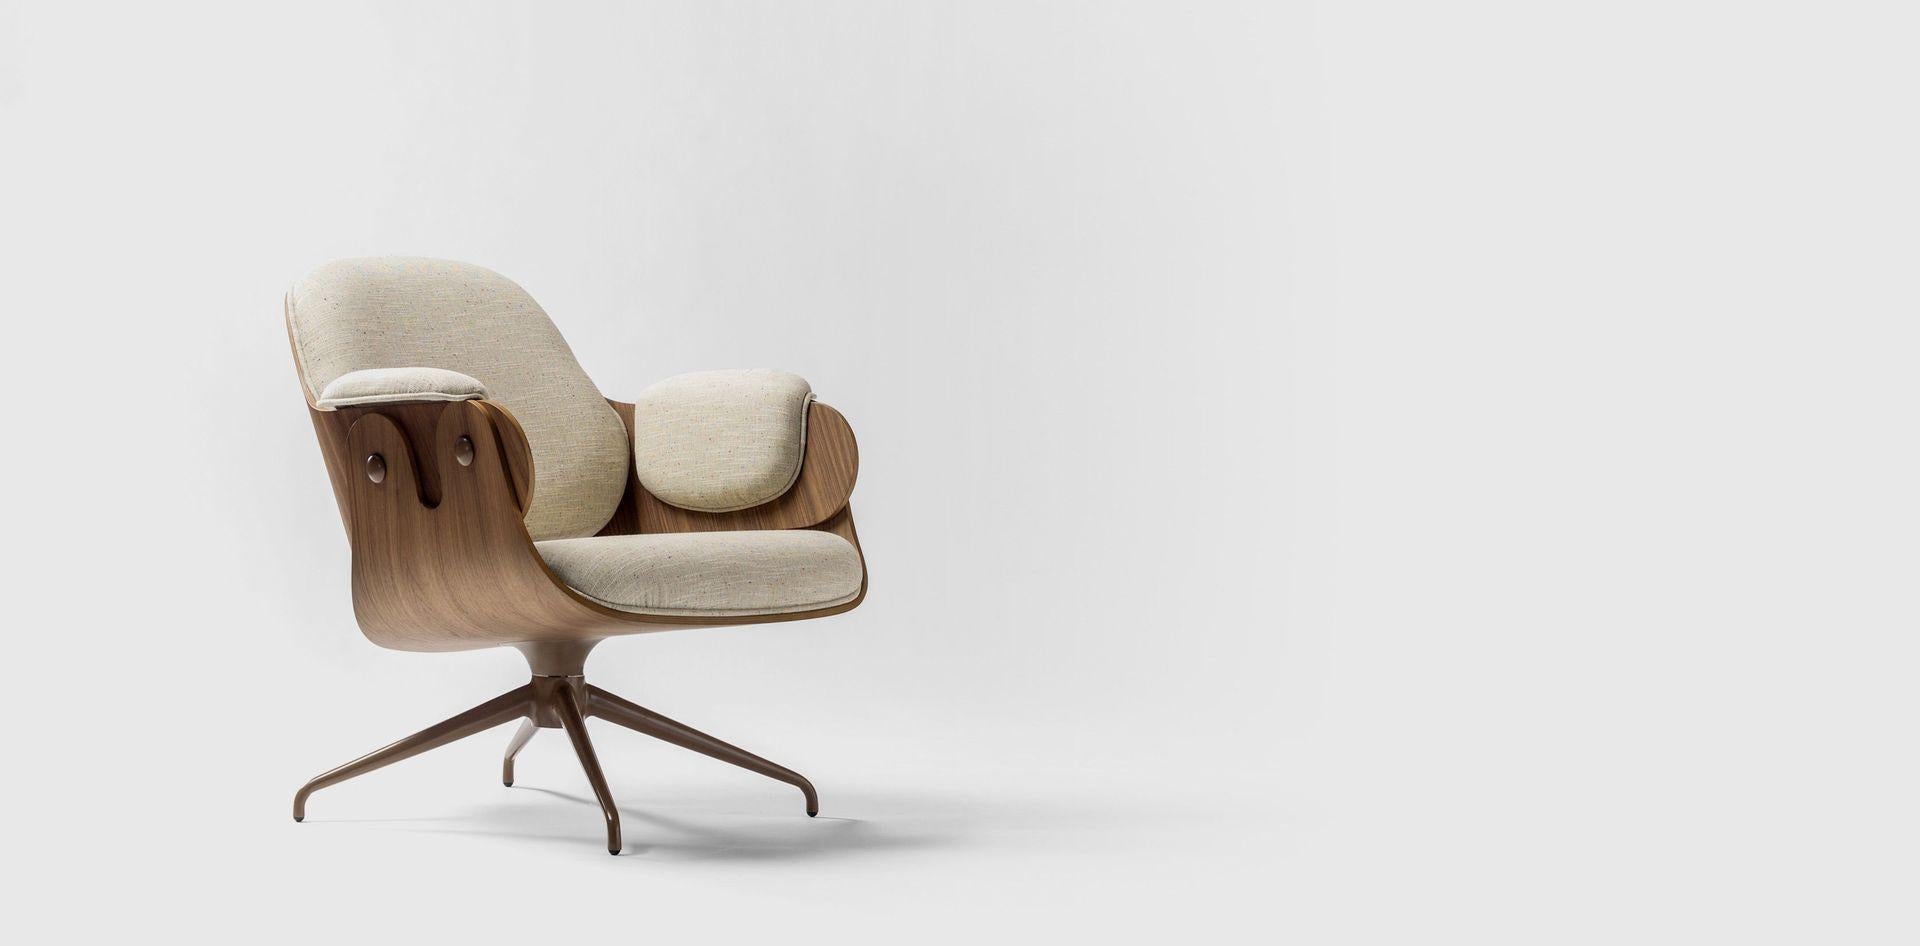 Lacquered Swivel Low Lounger Armchair by Jaime Hayon